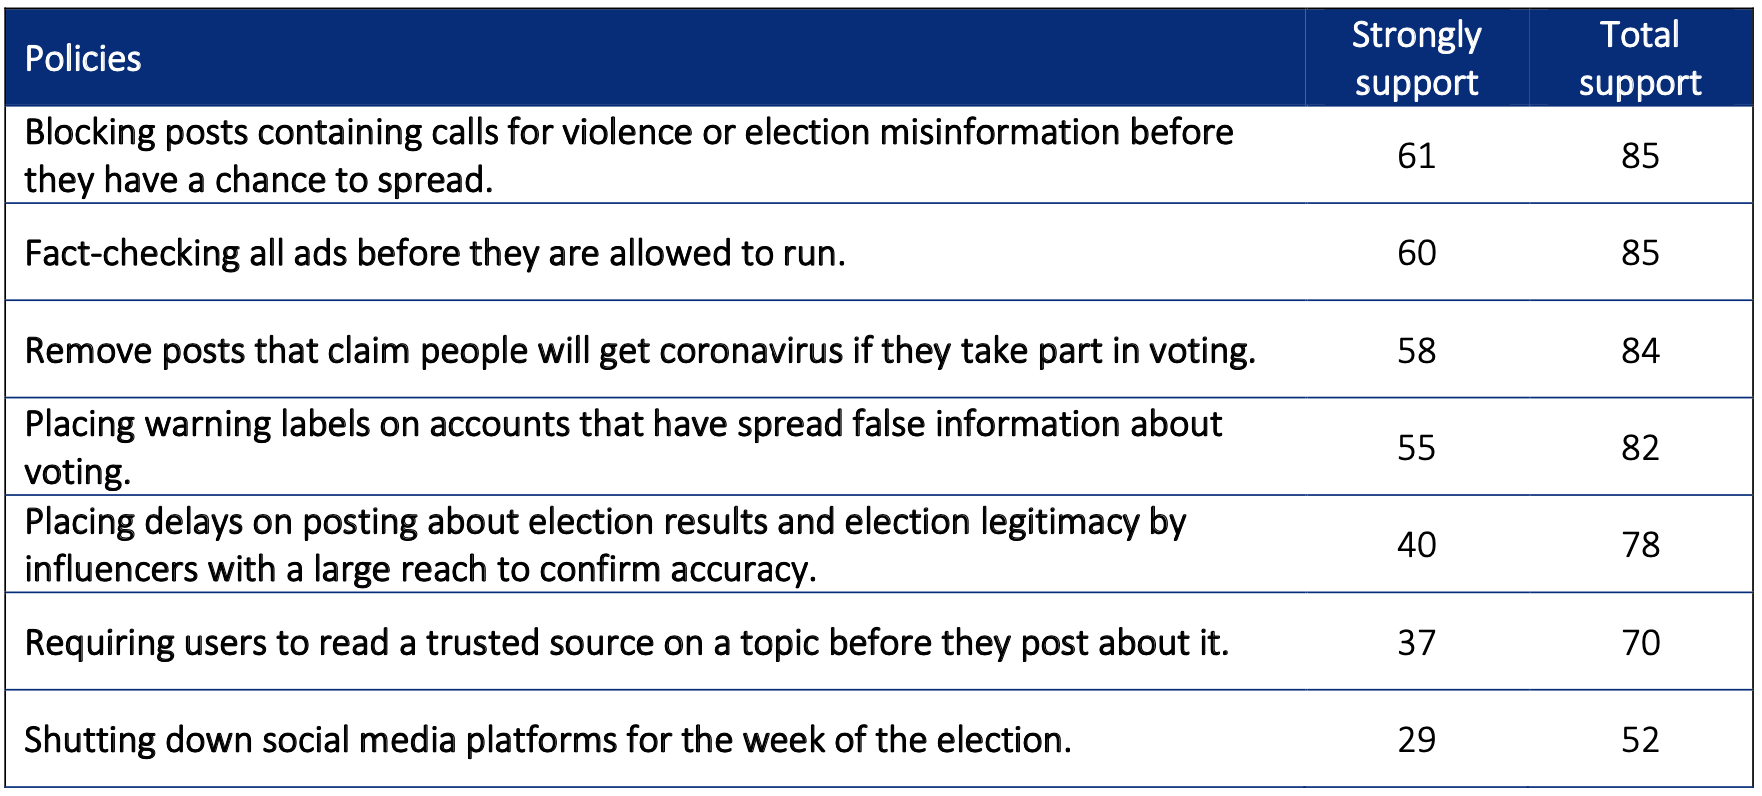 Figure 3: Support for social media policies